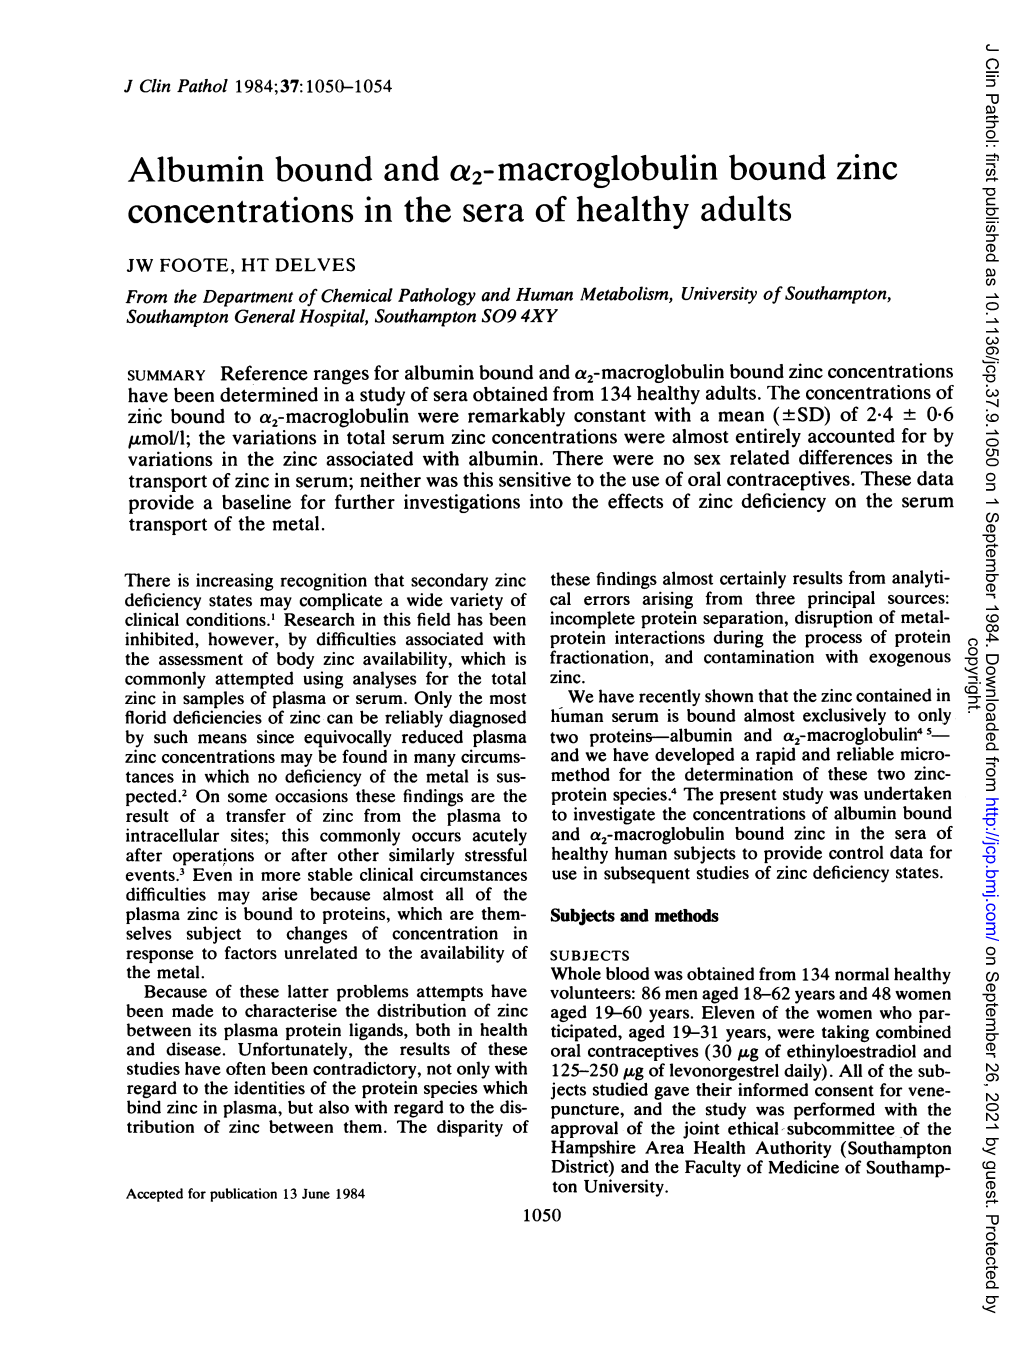 Albumin Bound and A2-Macroglobulin Bound Zinc Concentrations in the Sera of Healthy Adults